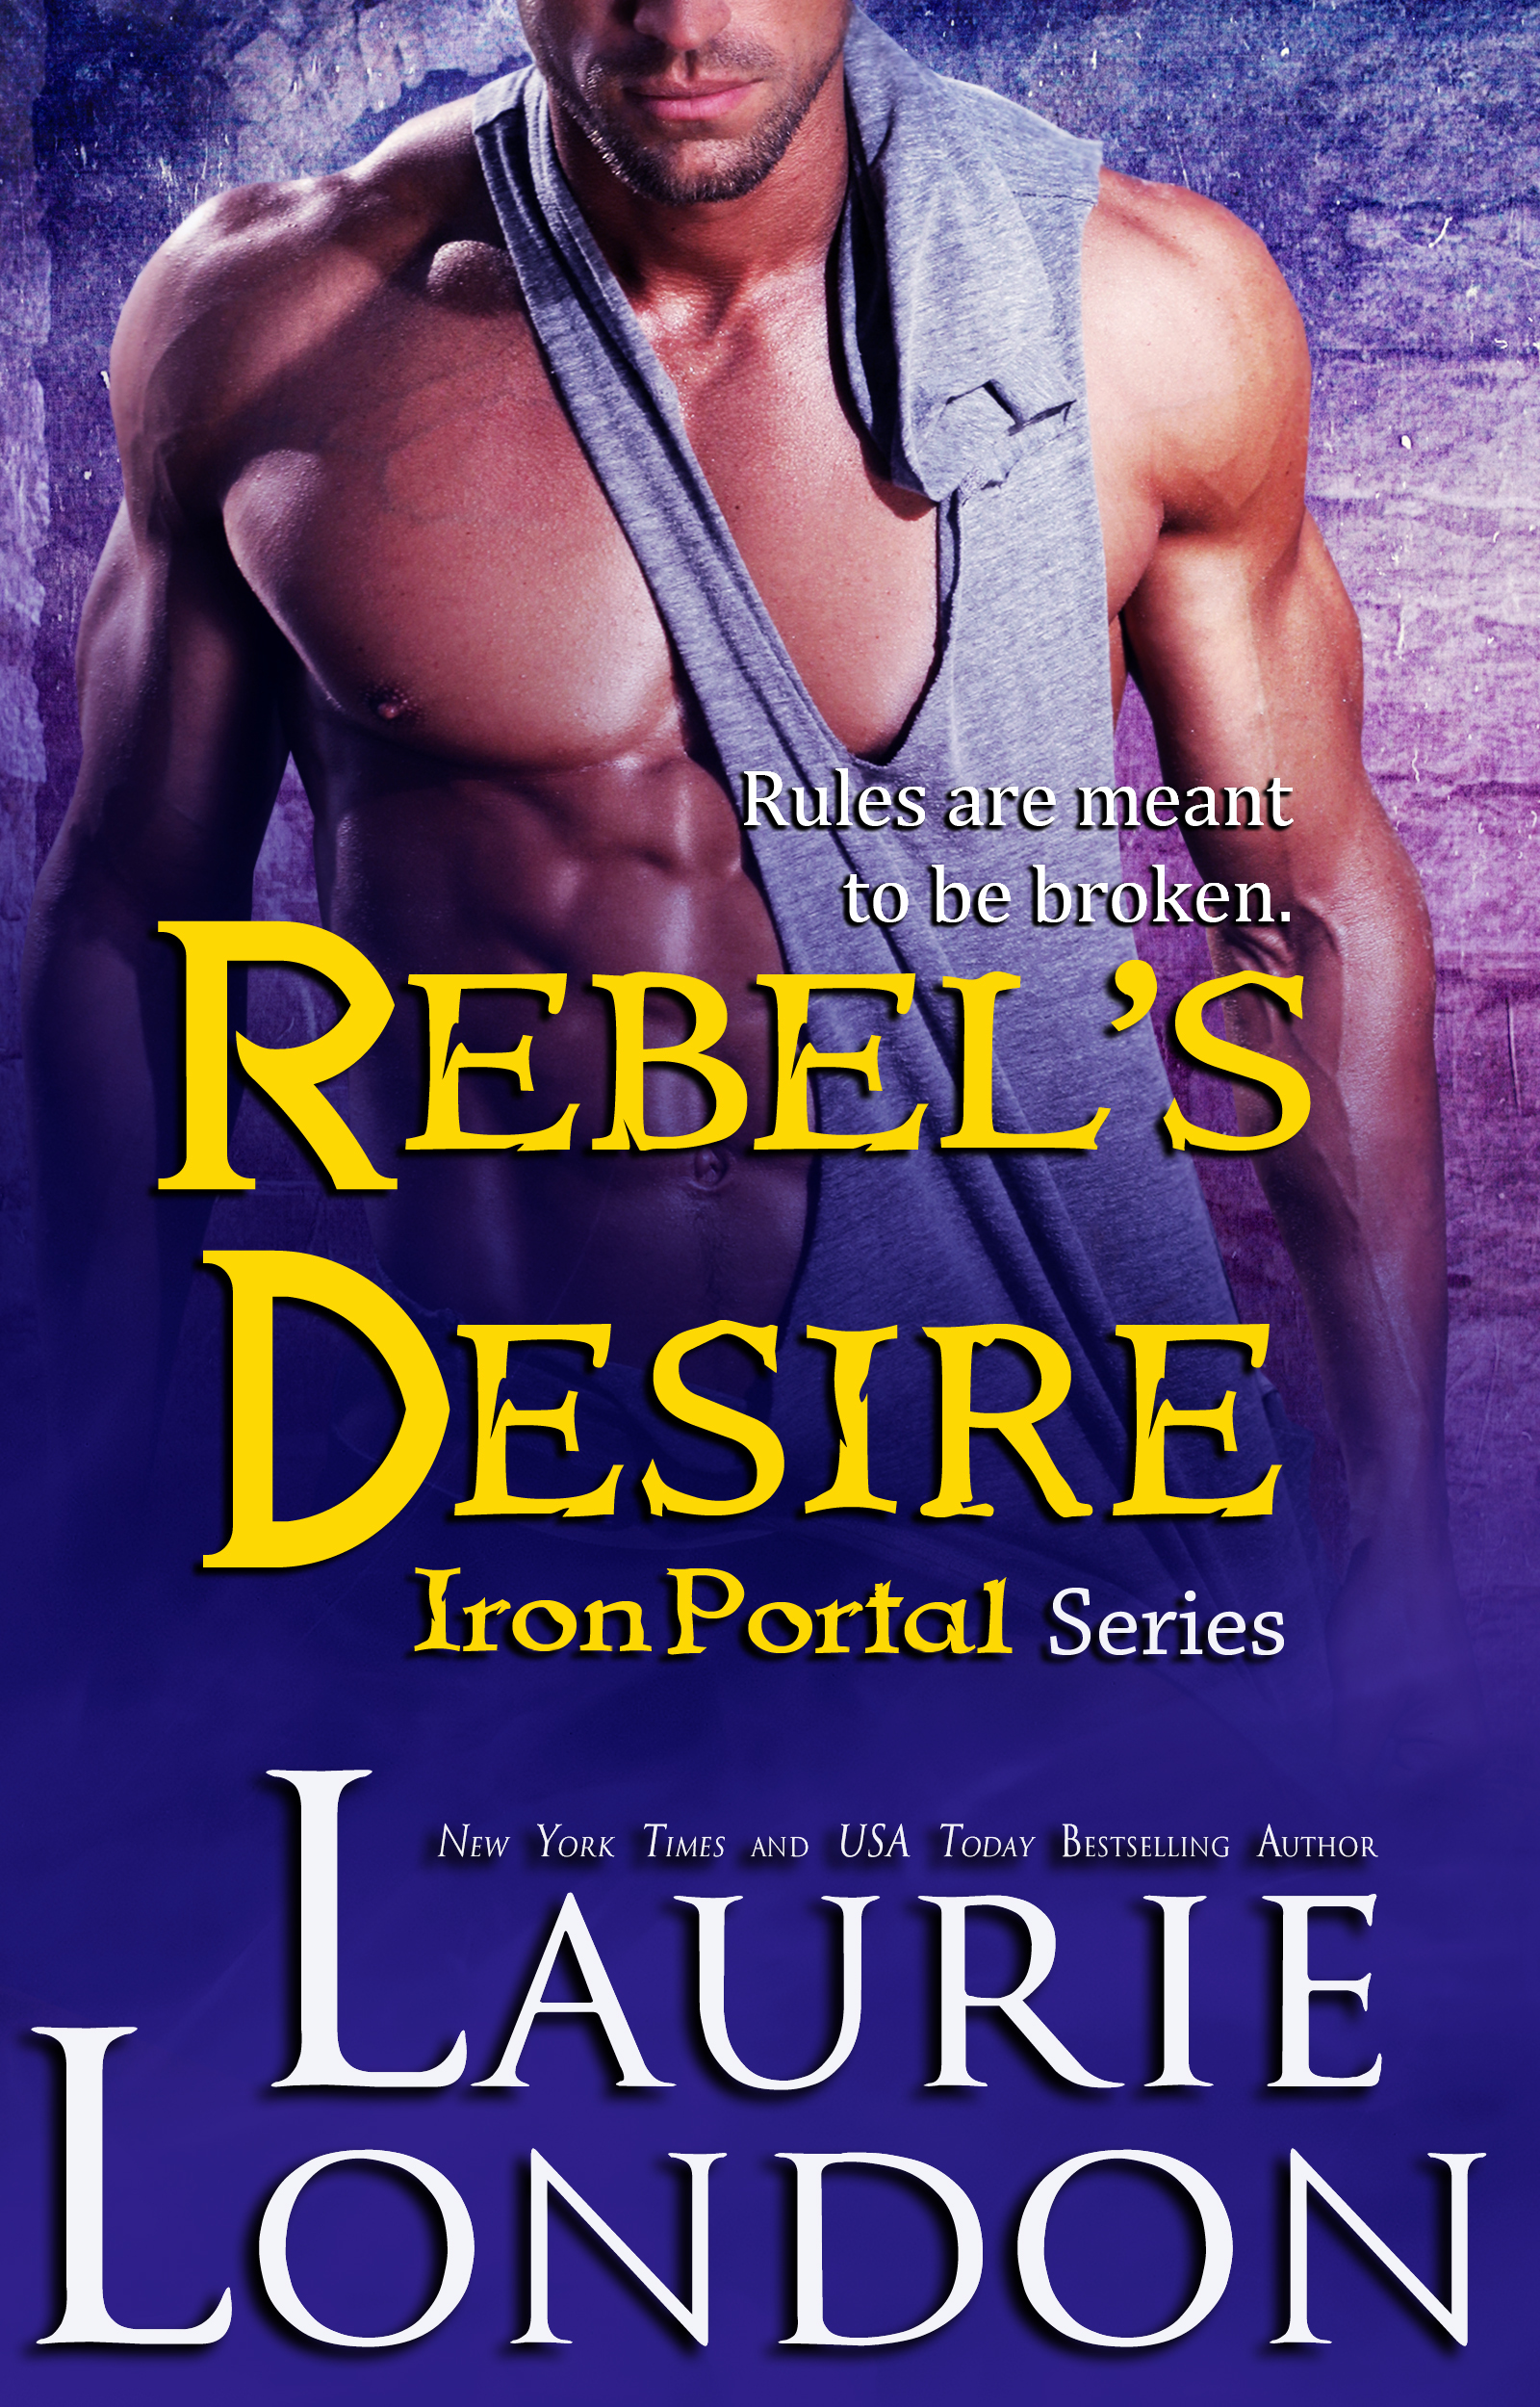 rebel's desire, paranormal romance by laurie london